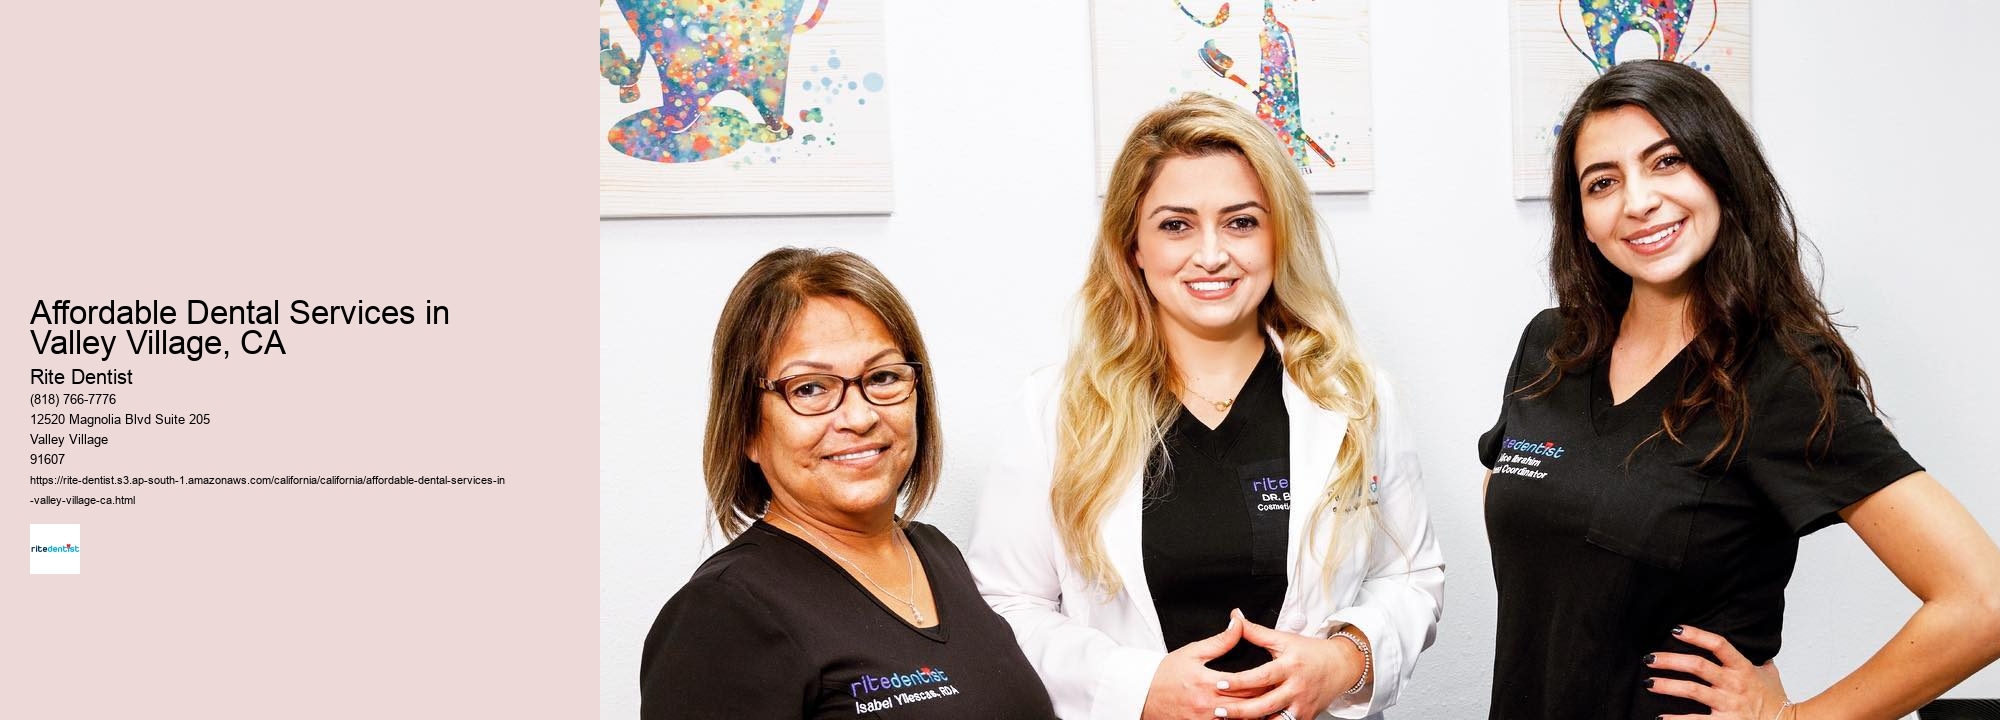 Affordable Dental Services in Valley Village, CA